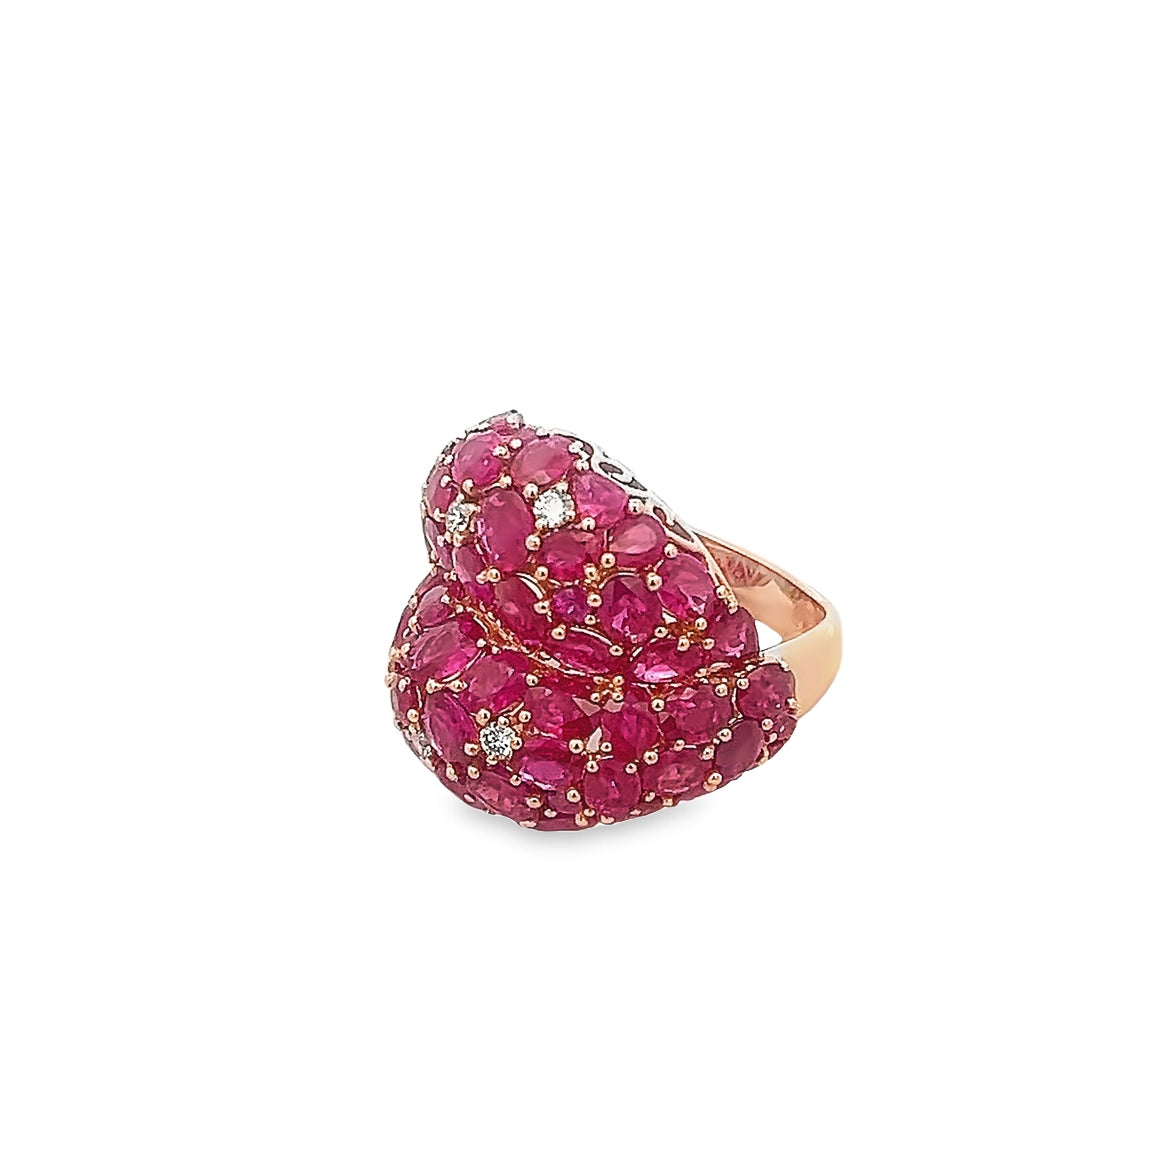 18K ROSE GOLD BOMBE RING WITH RUBY